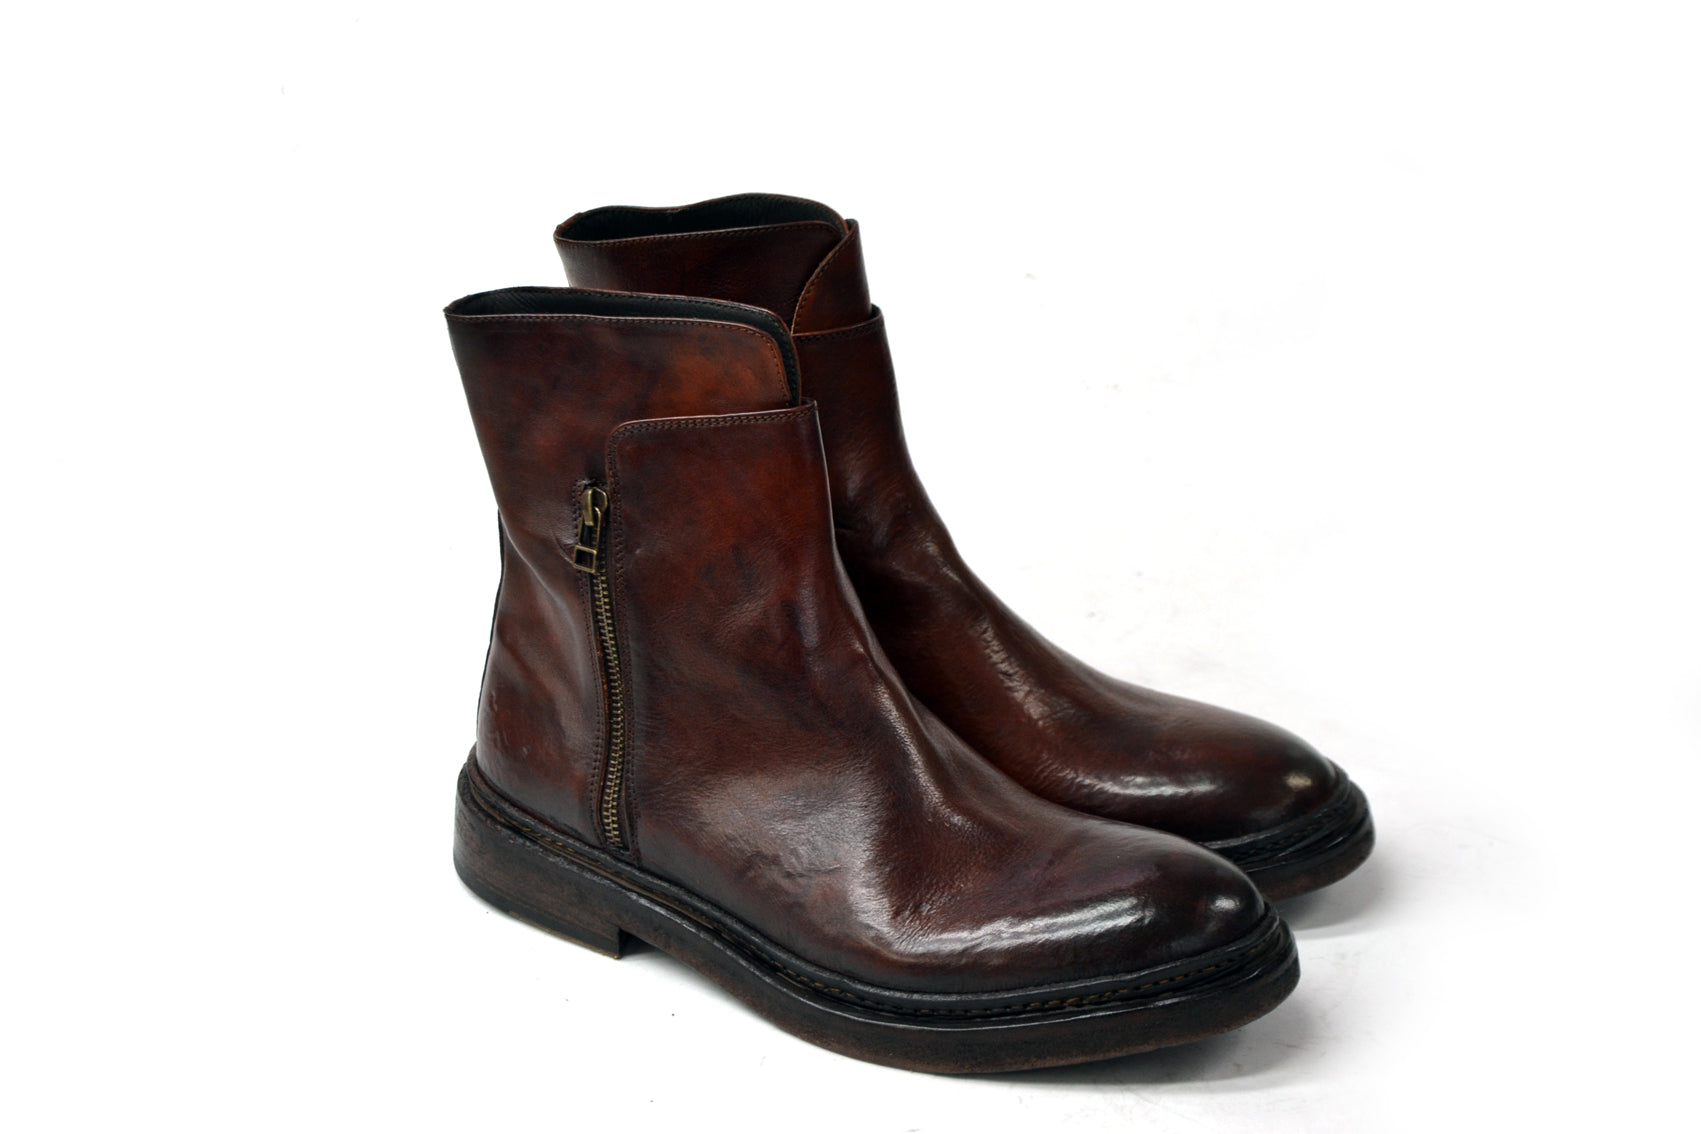 Bill Double-Zipped Mid Boots